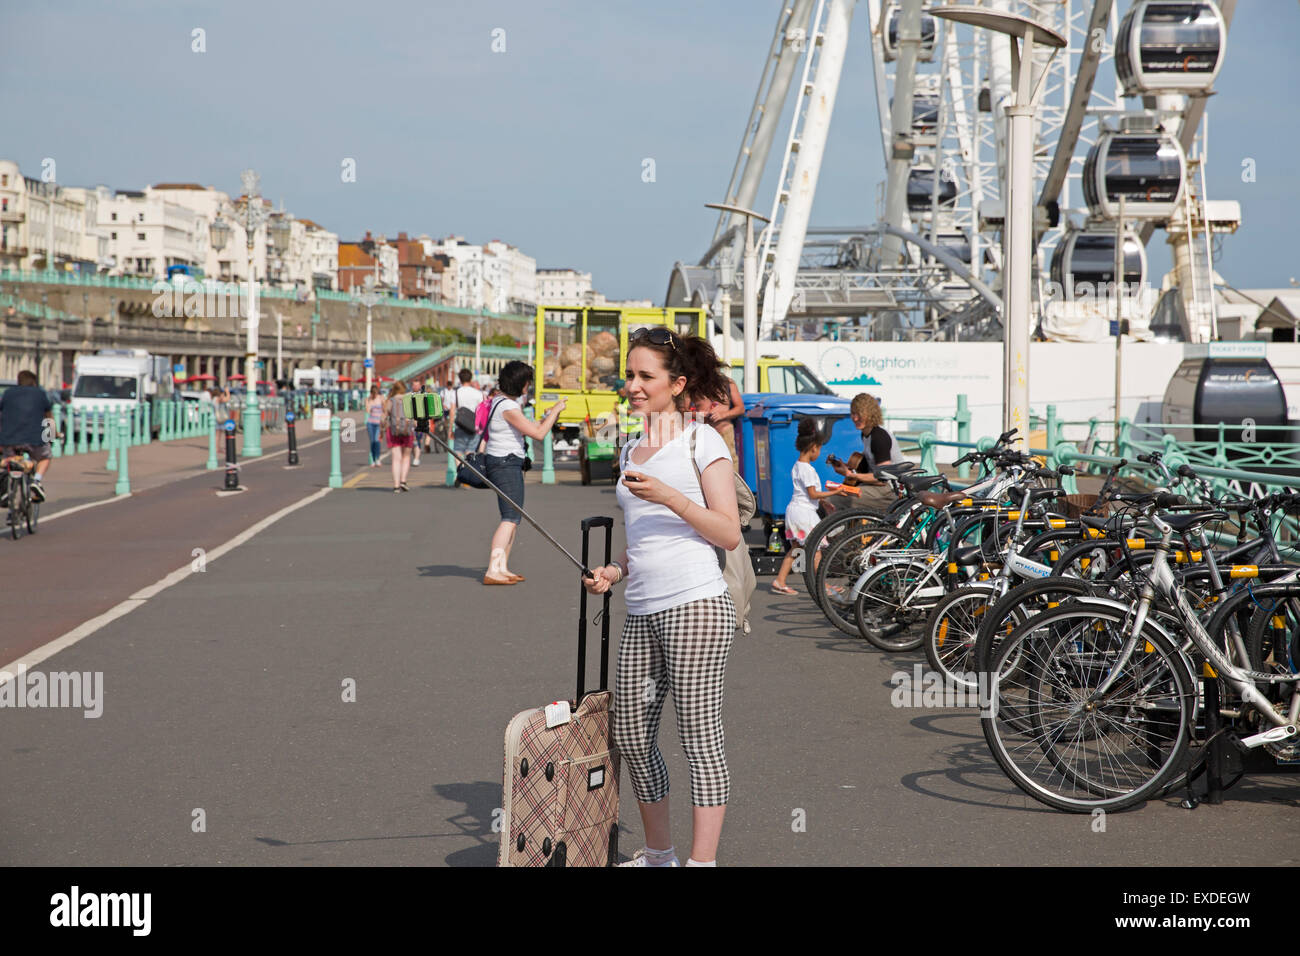 A visitor takes a selfie on brighton seafront Stock Photo